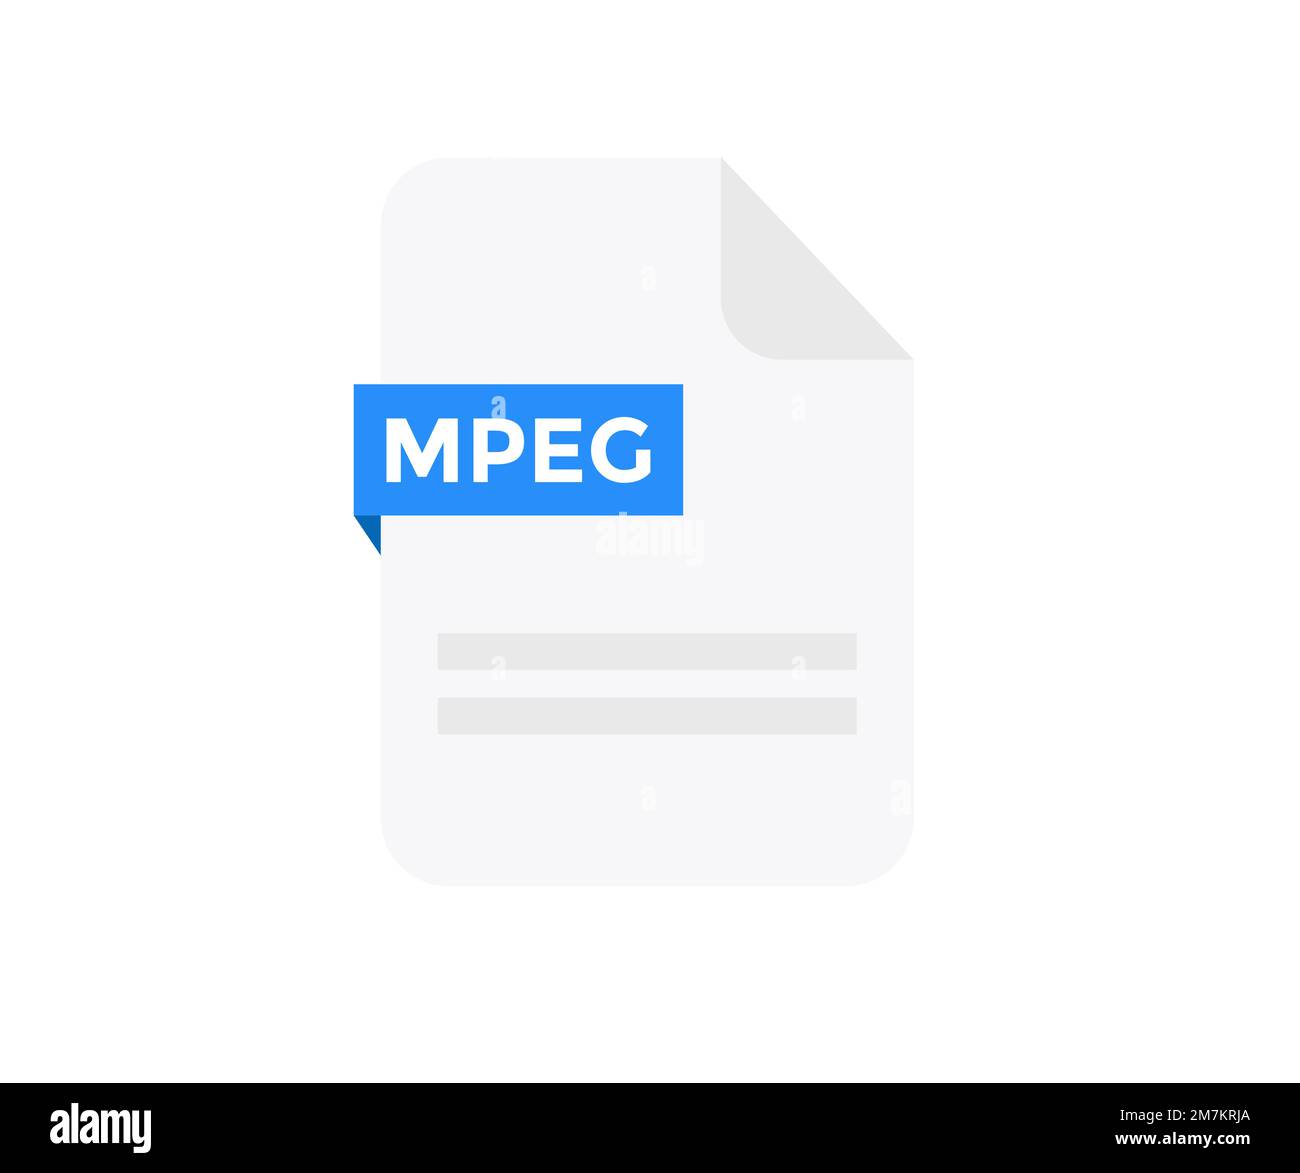 File format MPEG logo design. Document file icon, internet, extension, sign, type, presentation, graphic, application. Element for applications, web. Stock Vector